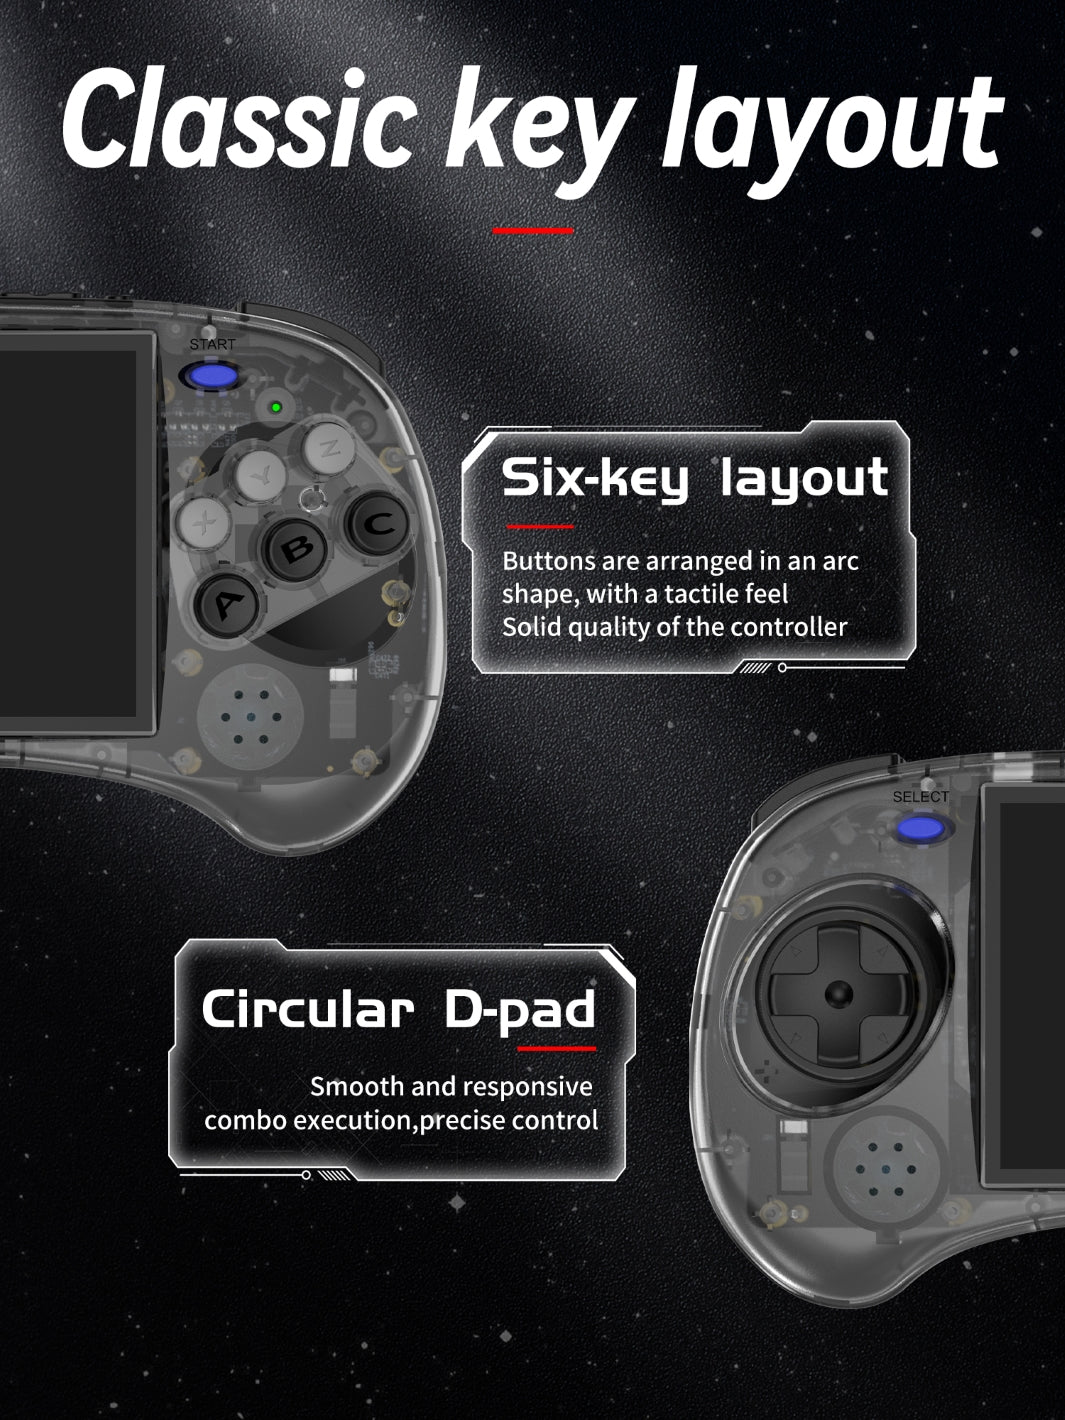 Anbernic RG ARC-S classic key layout: 6 button layout on the right and circular D-pad on the left